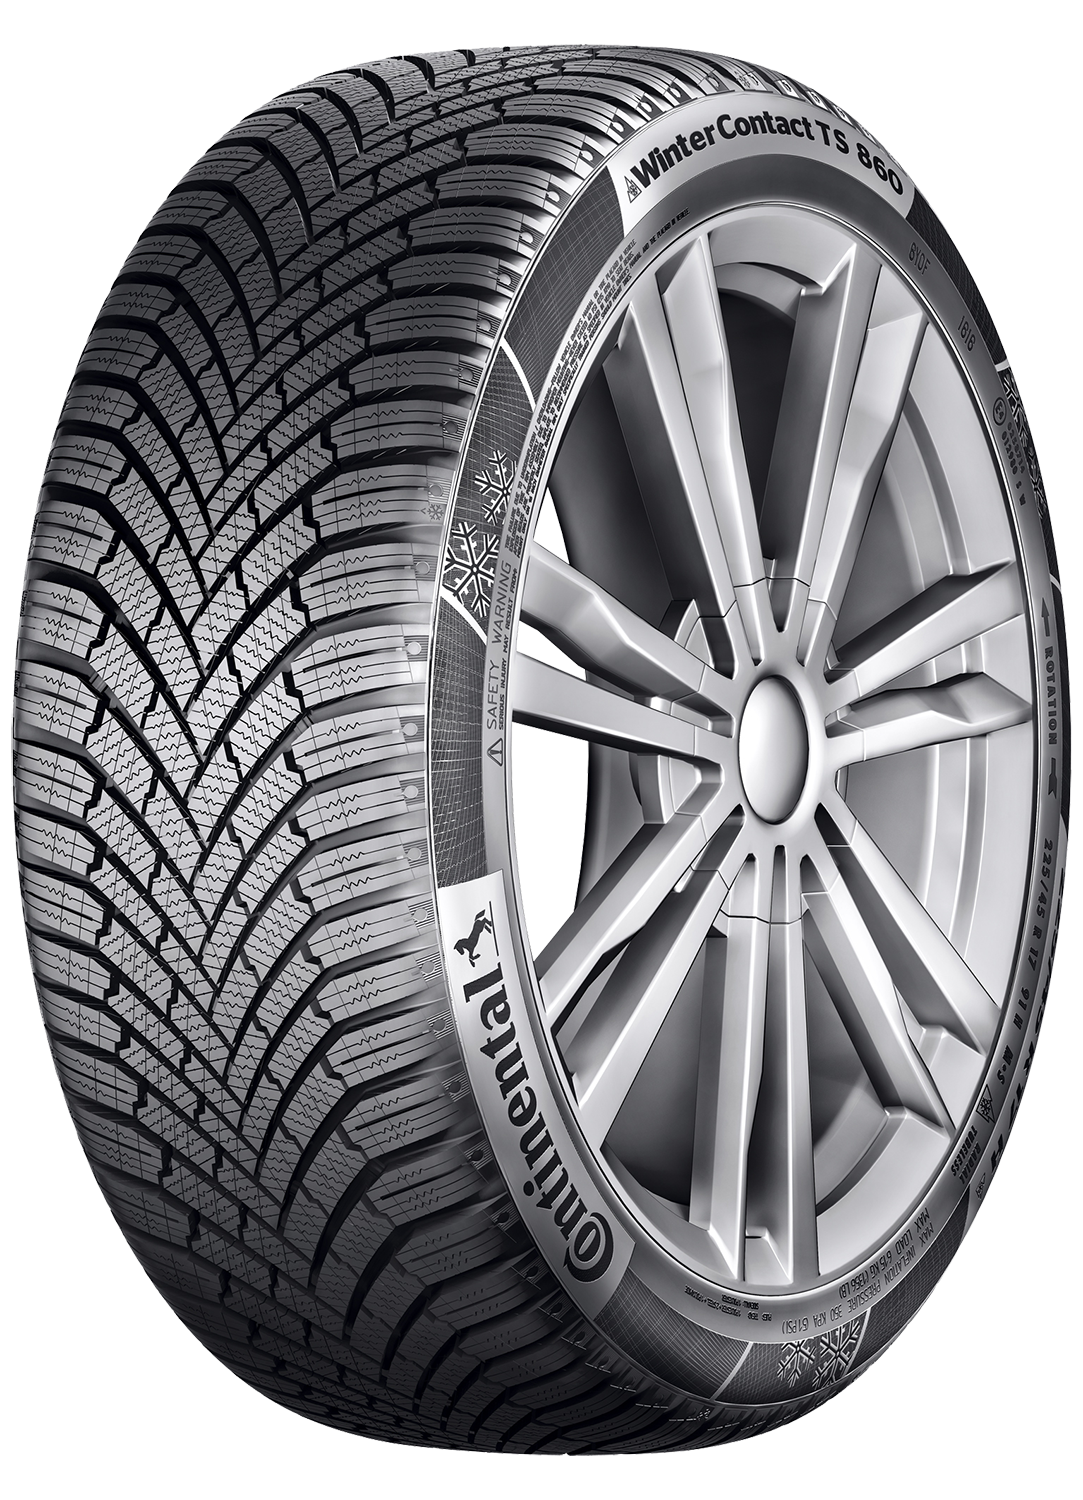 tires Continental - AG car Continental Winter from